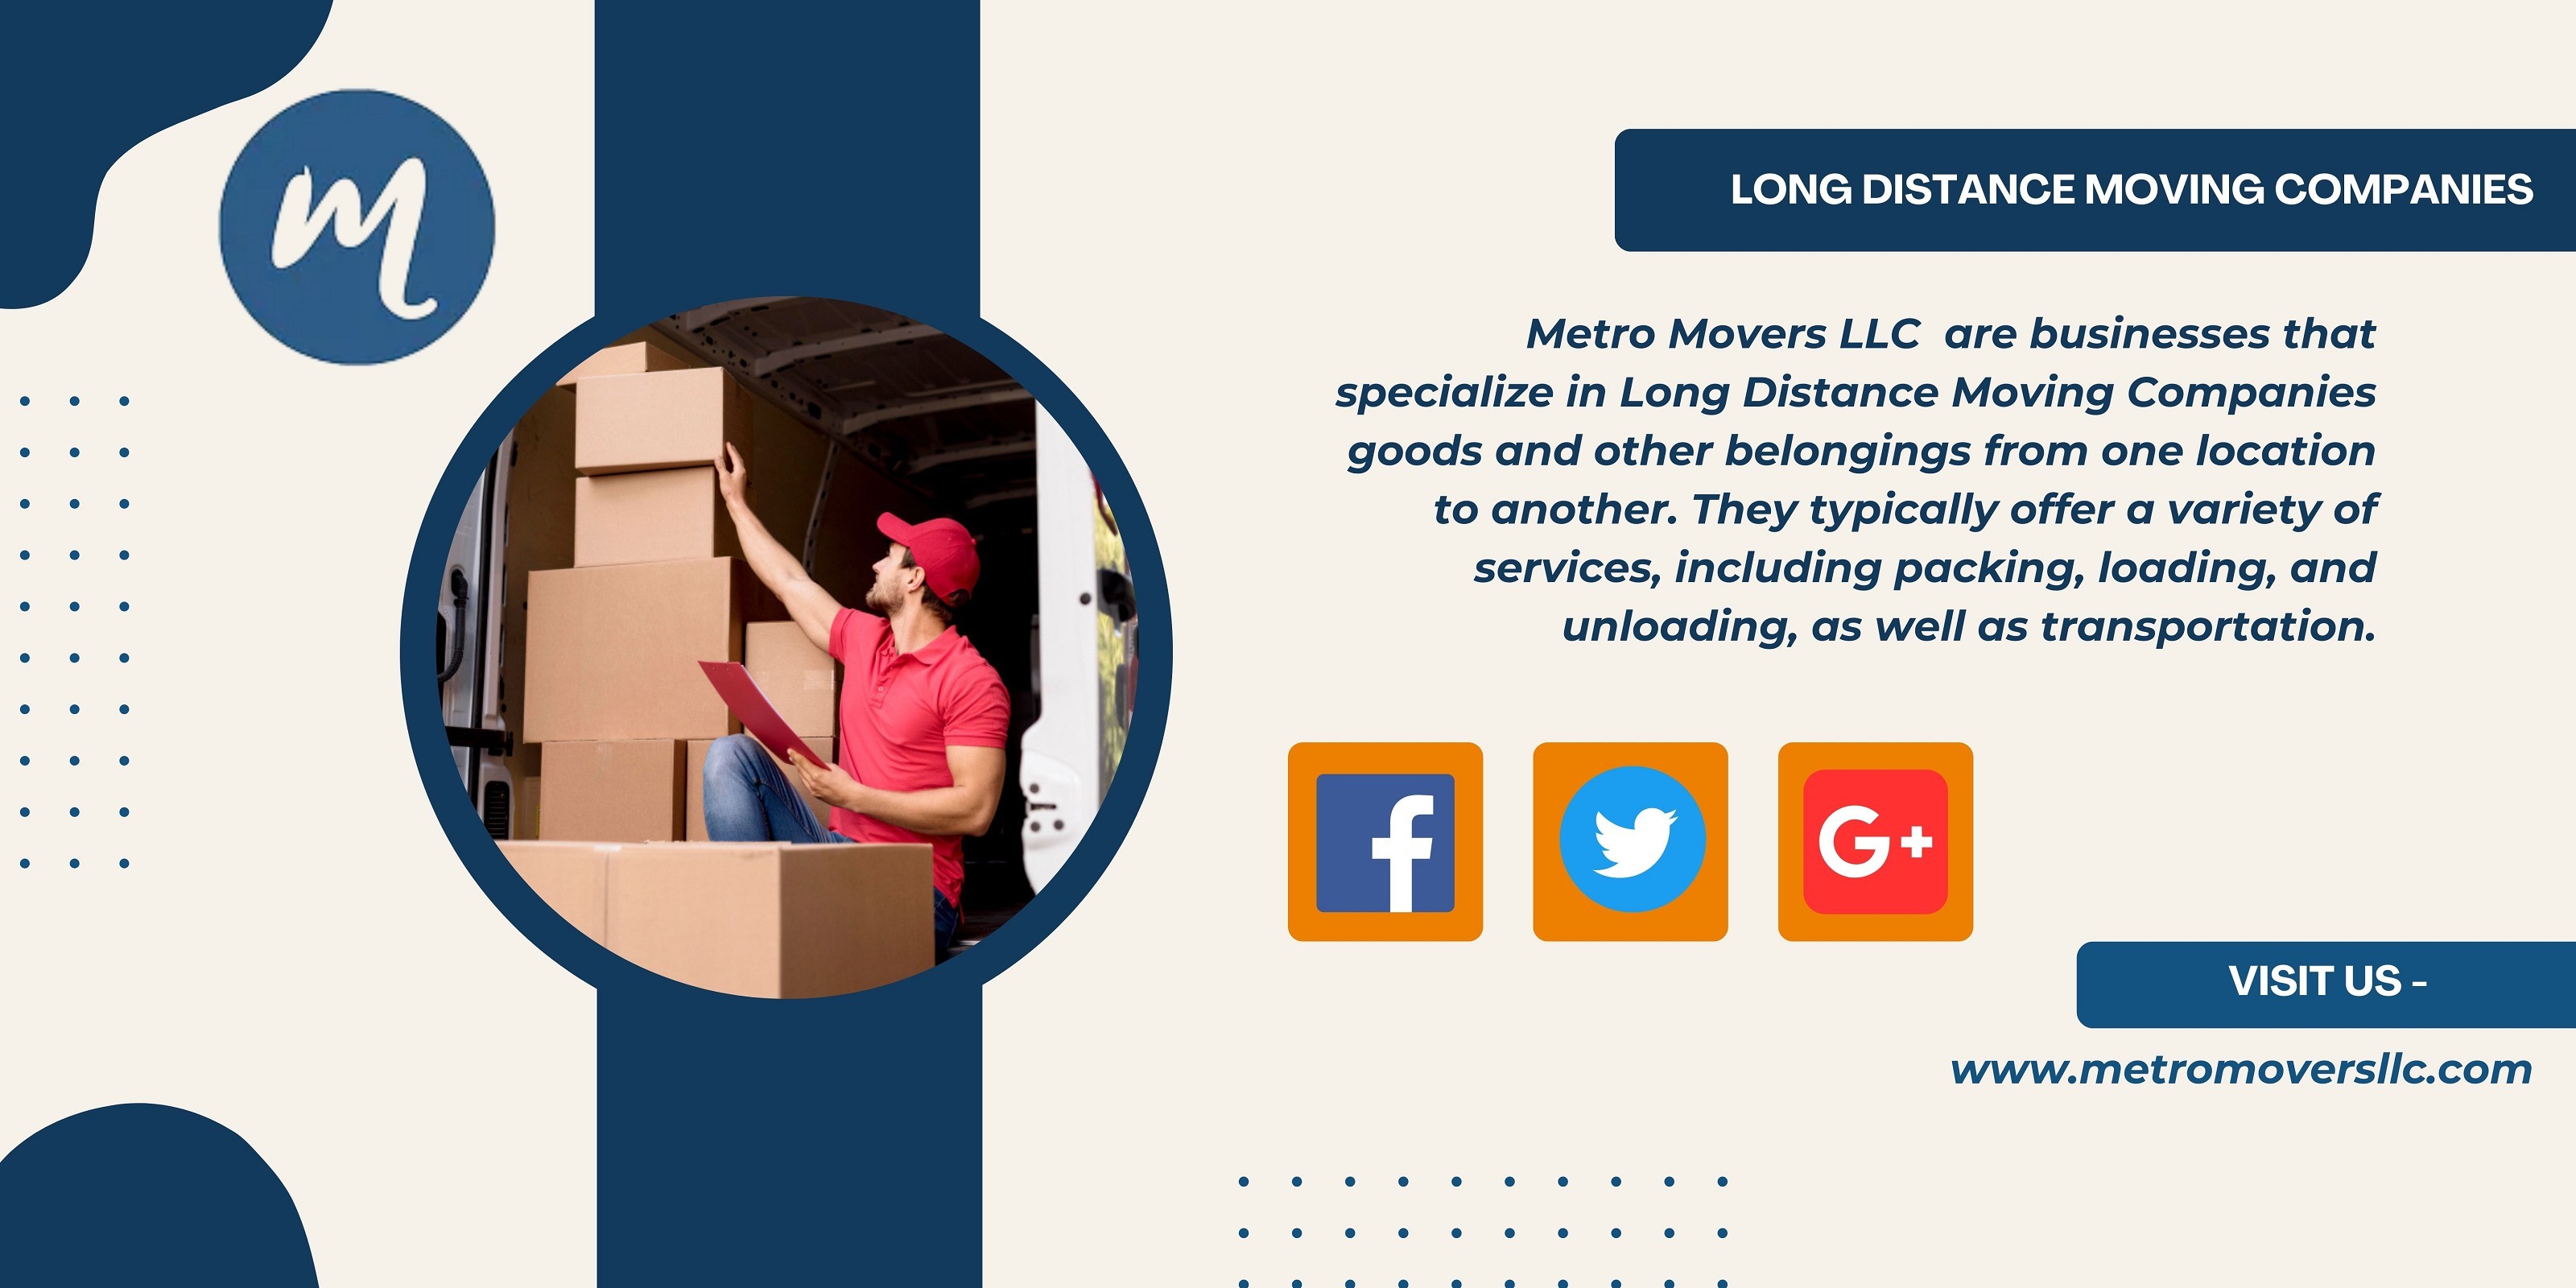 Easier Long Distance Moving Companies by Metro Movers